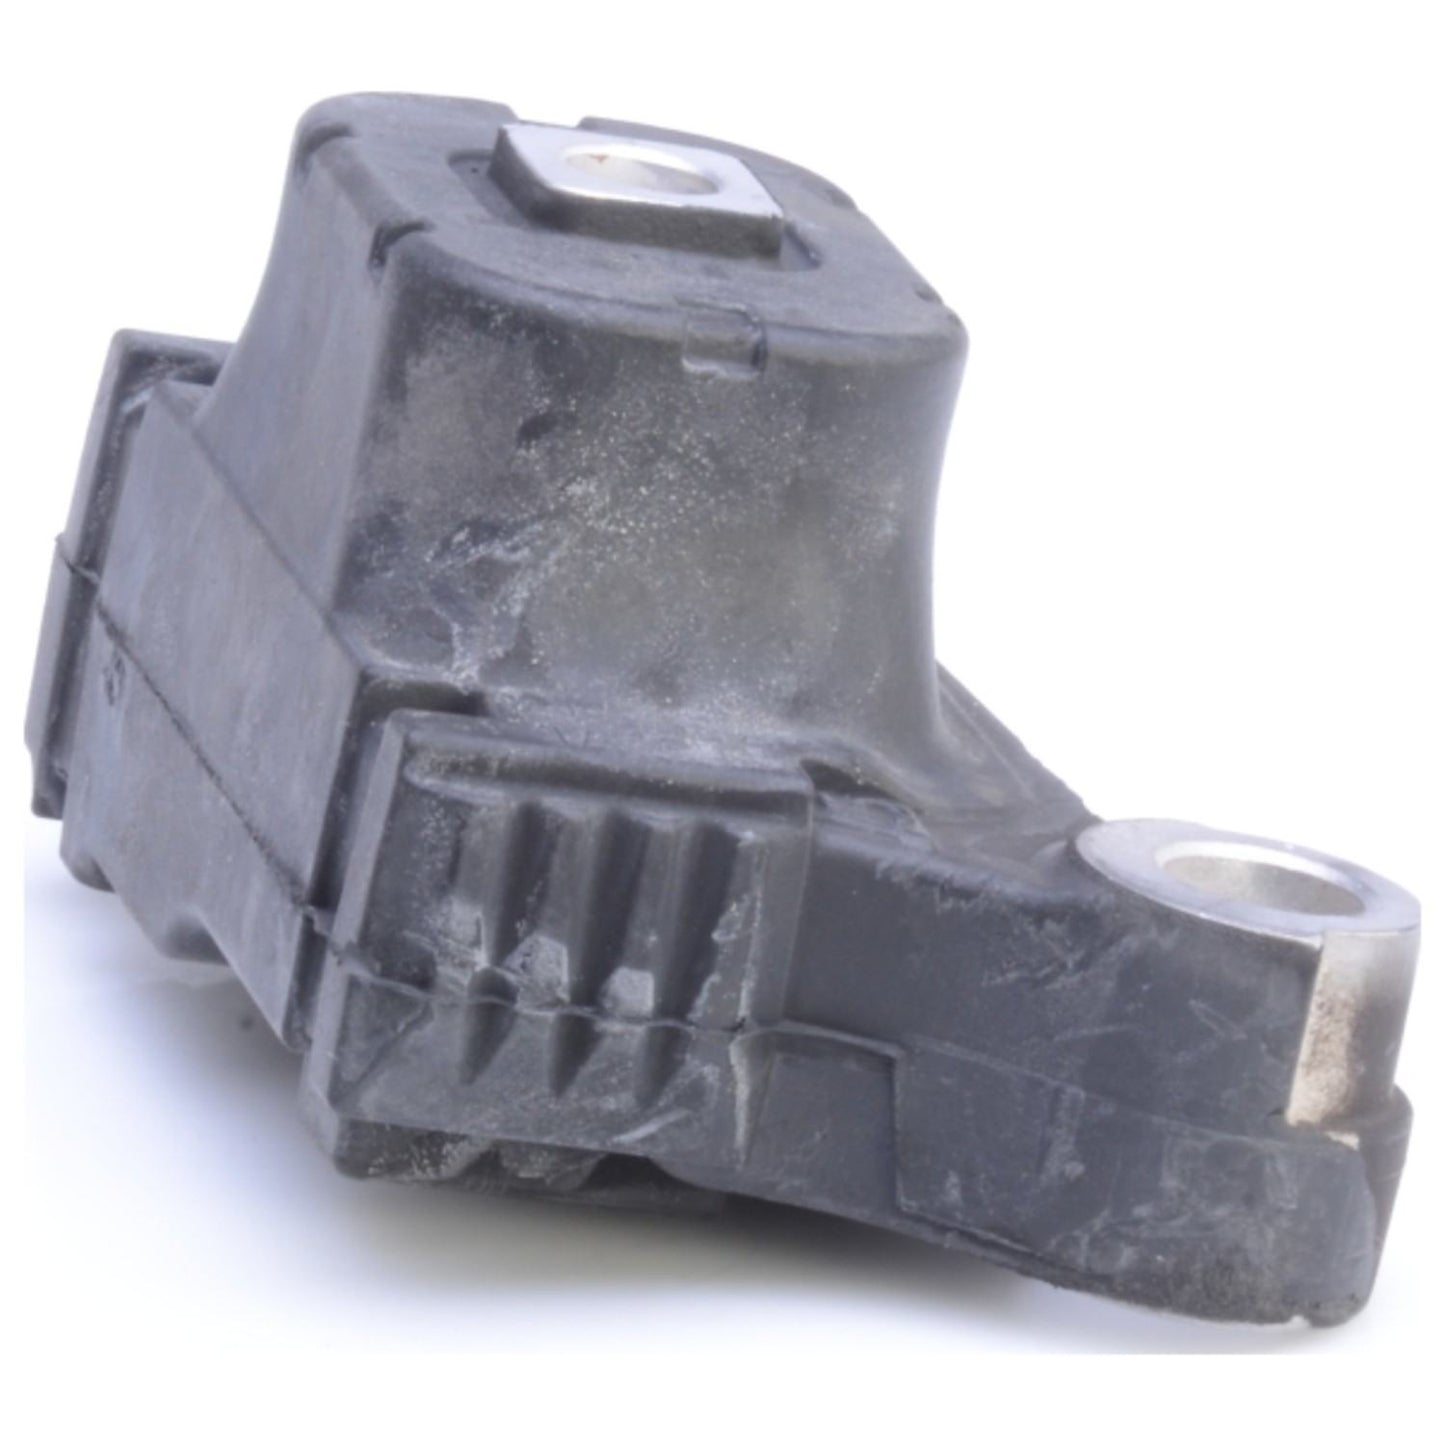 Right View of Left Automatic Transmission Mount ANCHOR 9860